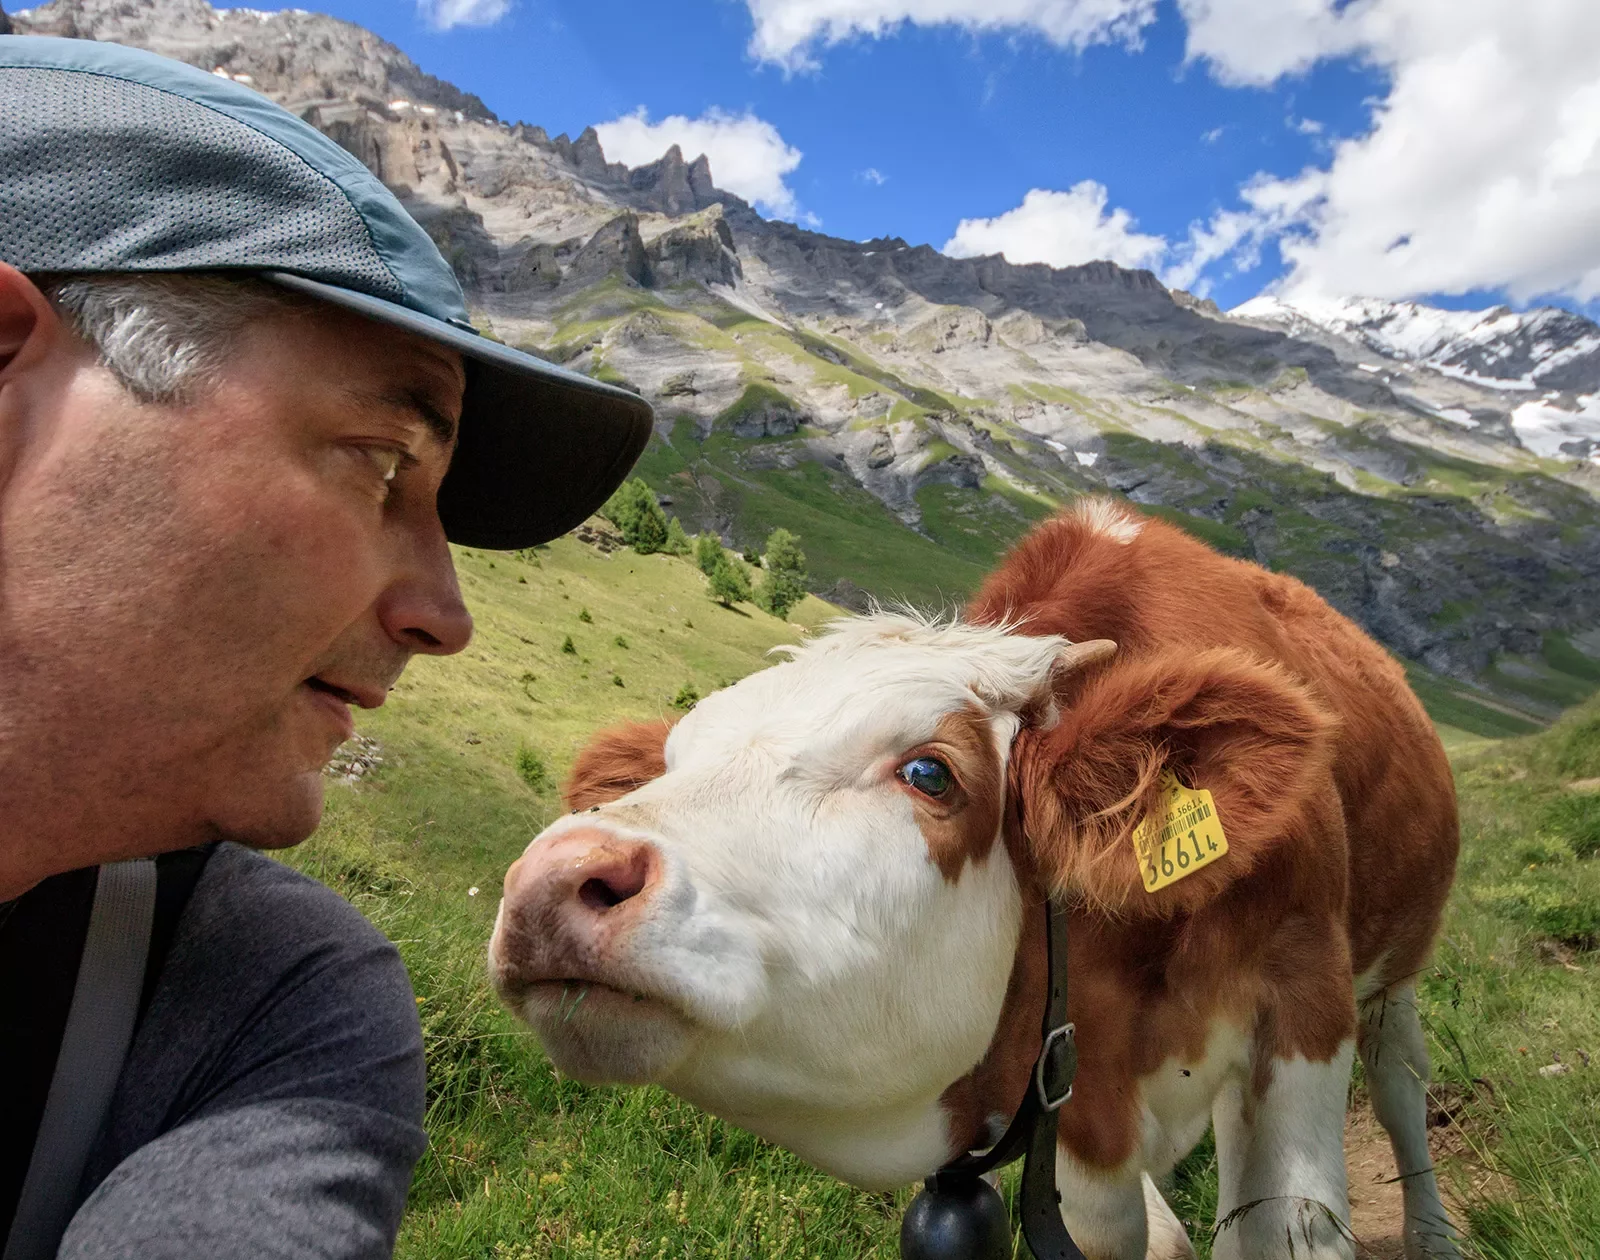 Guest face-to-face with cow, mountains behind them.